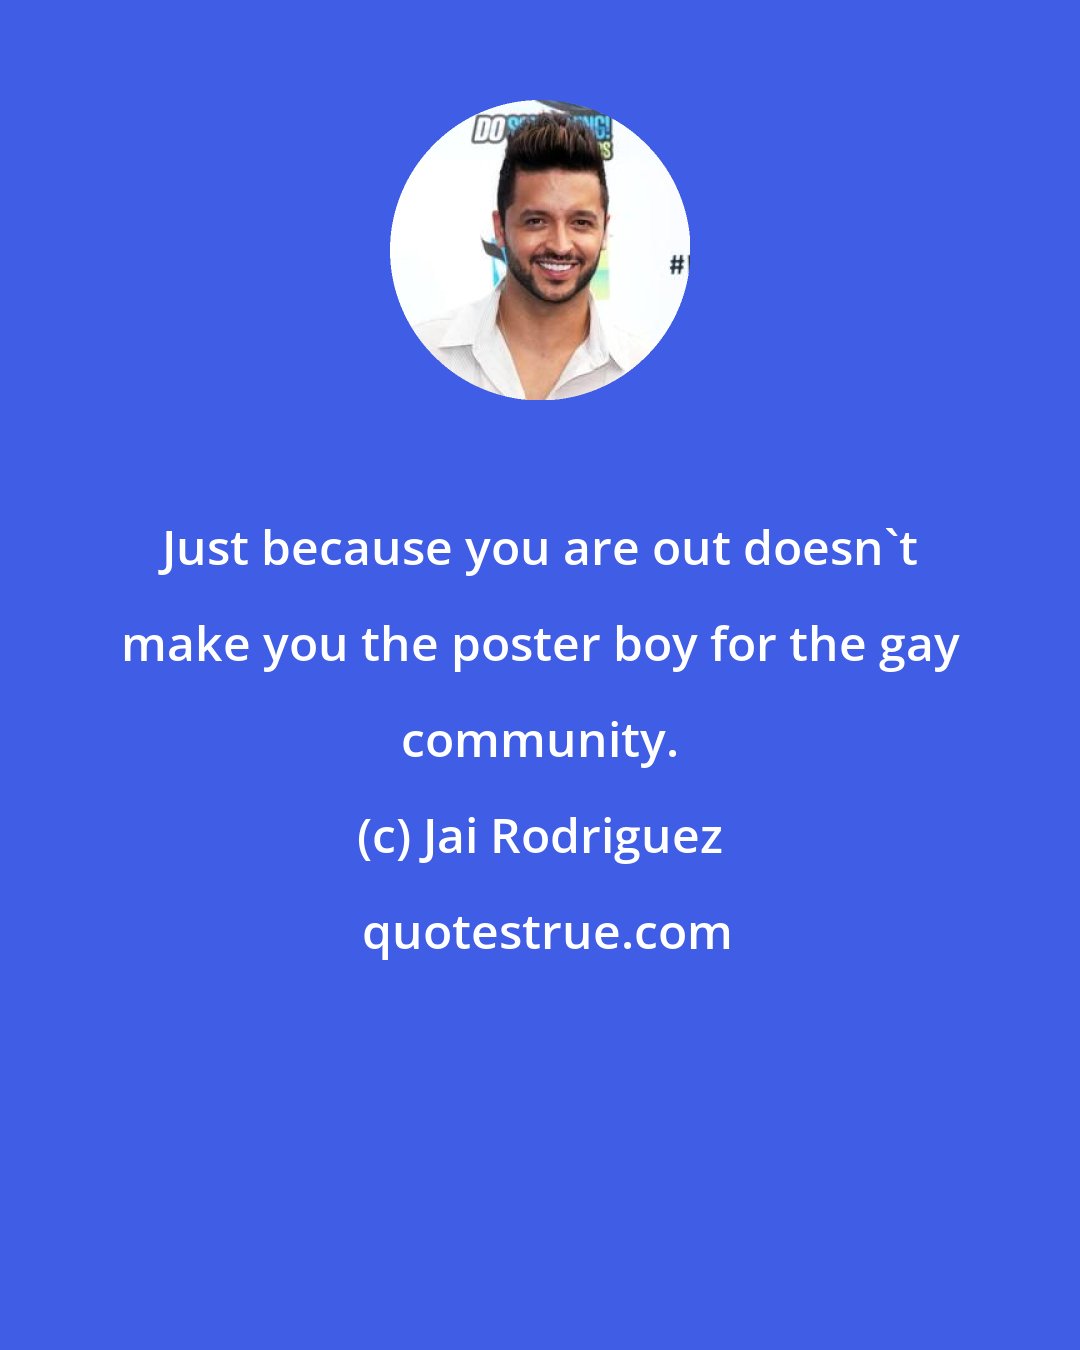 Jai Rodriguez: Just because you are out doesn't make you the poster boy for the gay community.